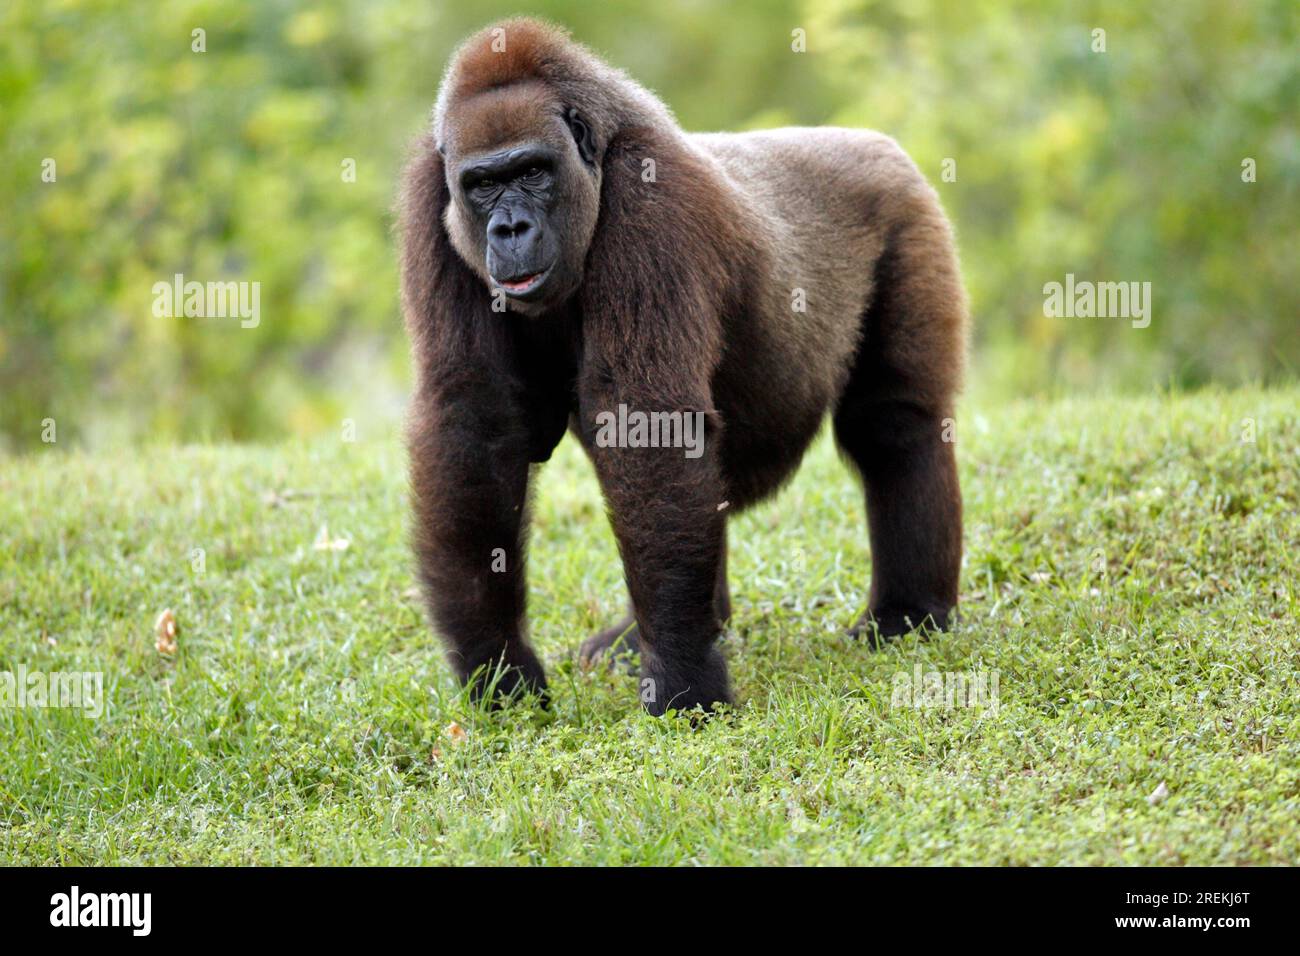 Western lowland western gorilla (Gorilla Gorilla) Lowland g. gorilla Adult female female Occurrence: Africa Africa Stock Photo